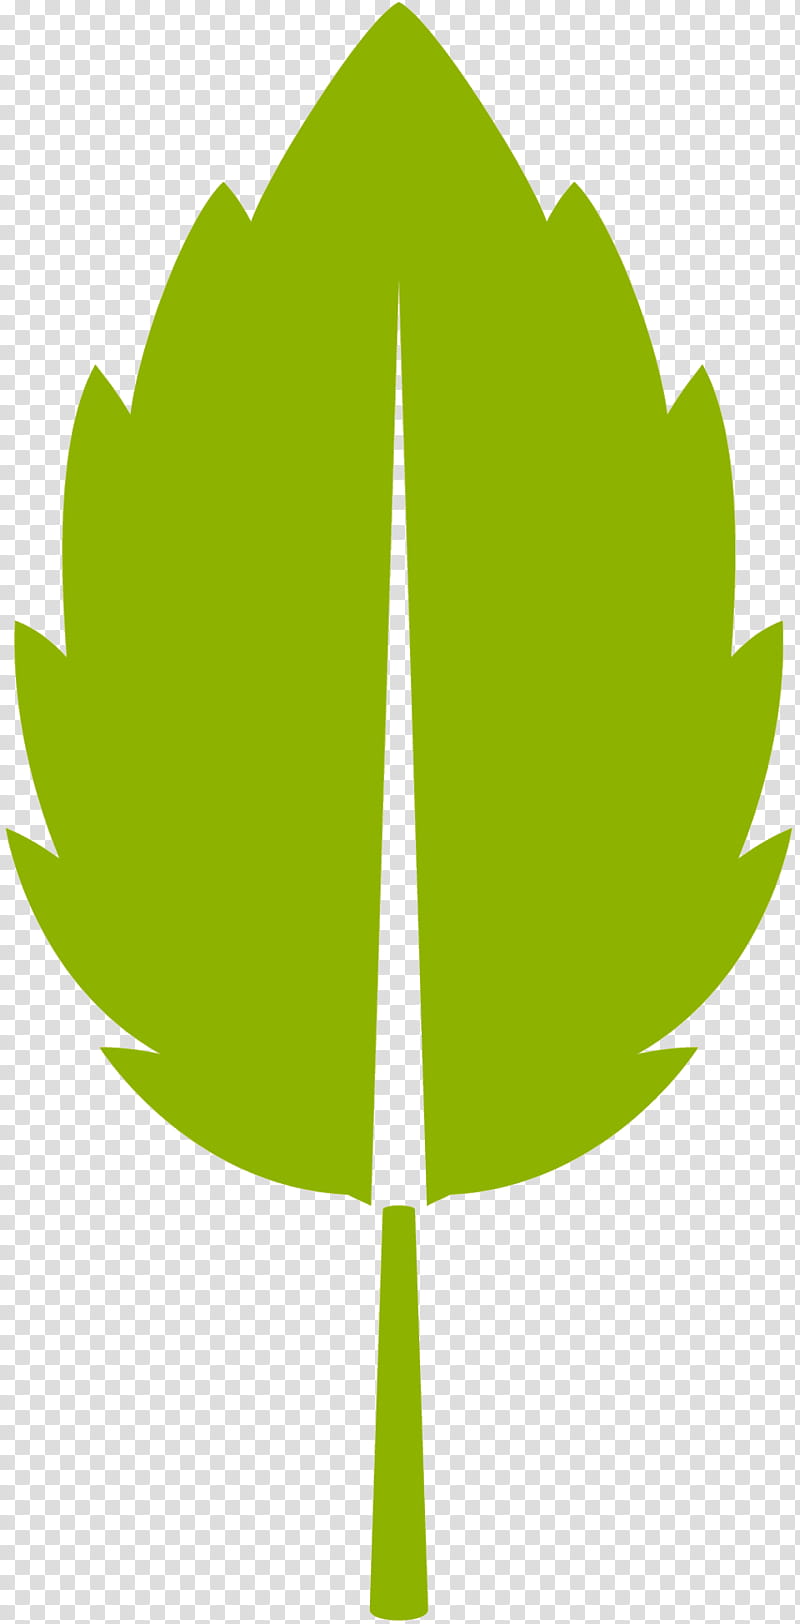 Green Leaf Logo, Bark Co, Car, Code, Coupon, Subscription Box, Review, Tree transparent background PNG clipart